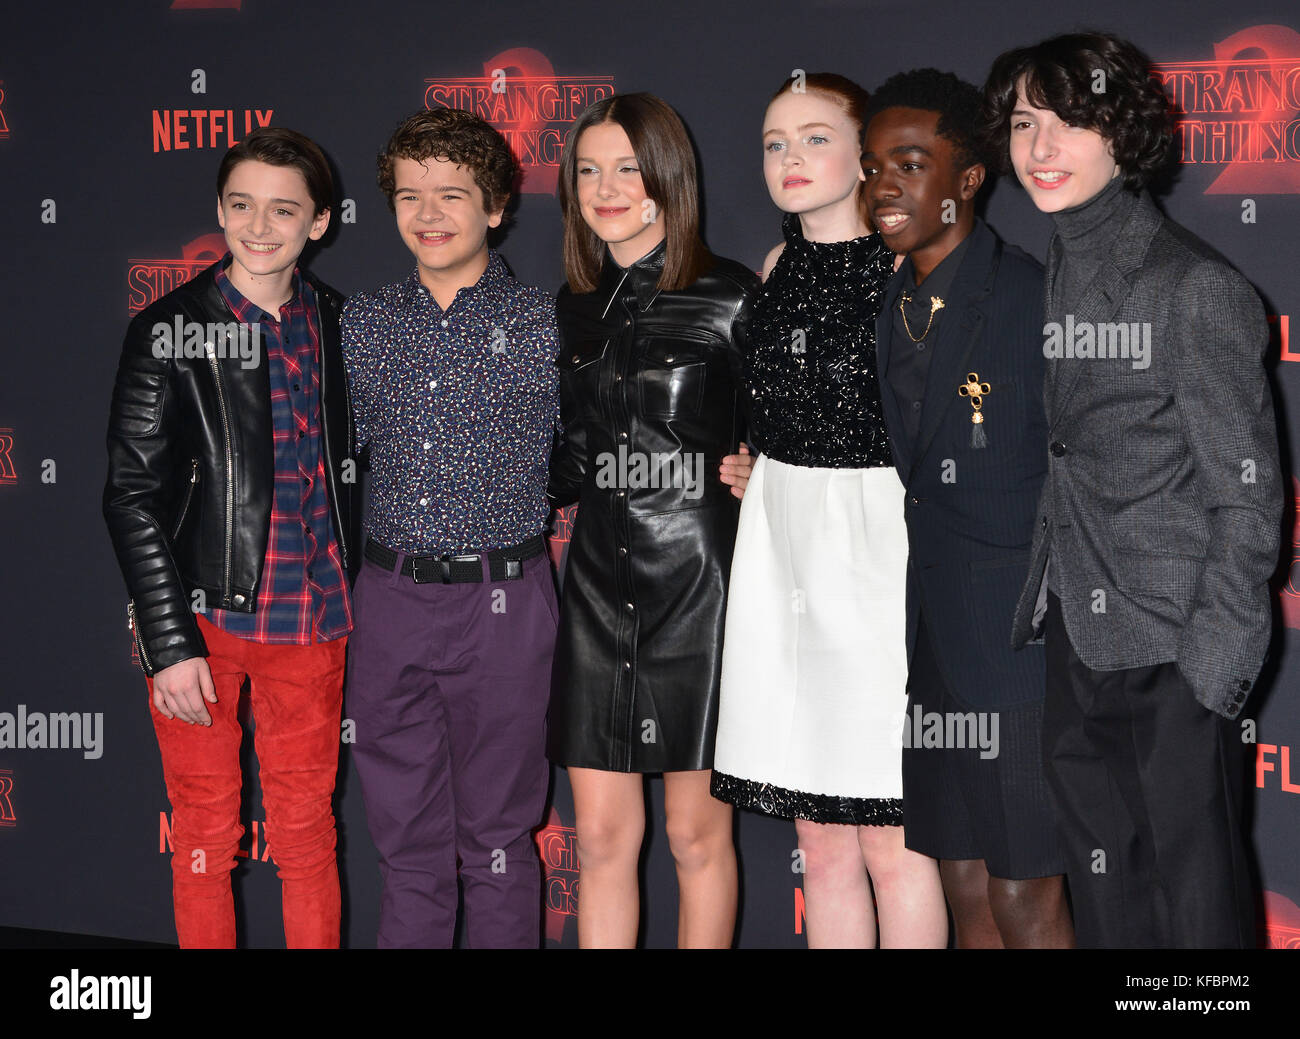 WESTWOOD, LOS ANGELES, CA, USA - OCTOBER 26: Actress Millie Bobby Brown  wearing a Calvin Klein dress arrives at the Los Angeles Premiere Of  Netflix's 'Stranger Things' Season 2 held at the